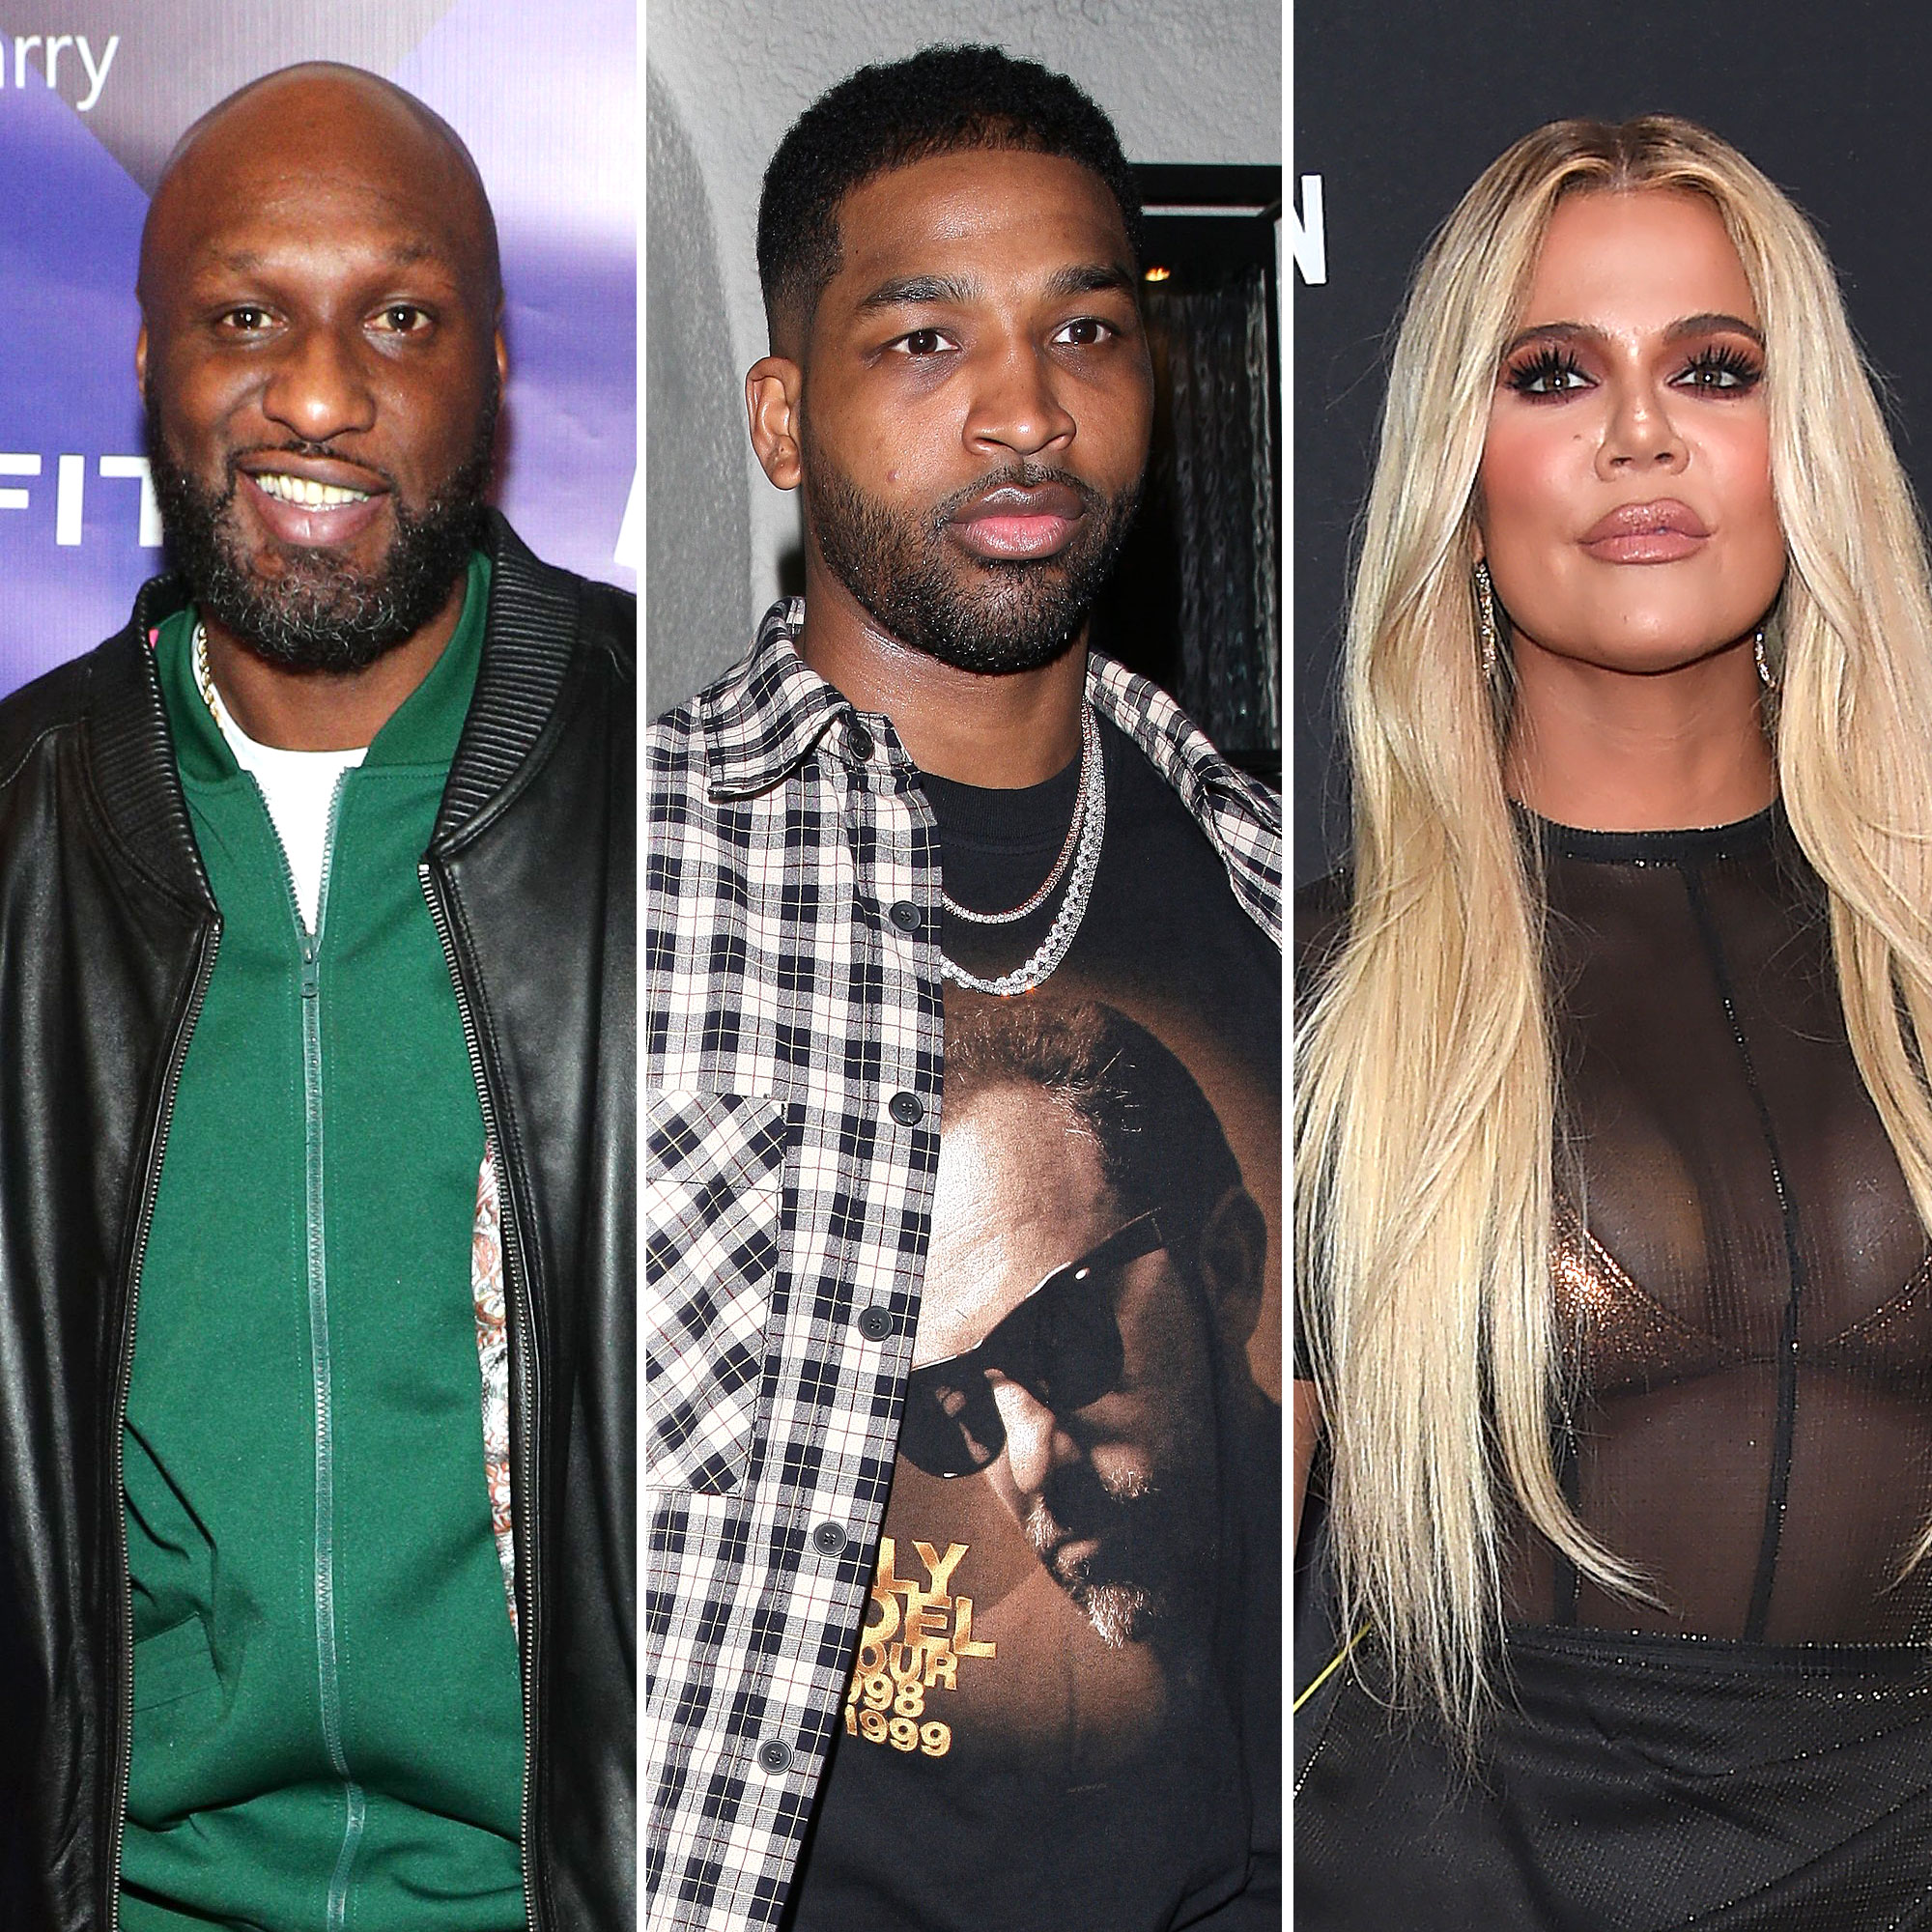 Photos from Lamar Odom's Happy Times On and Off the Court